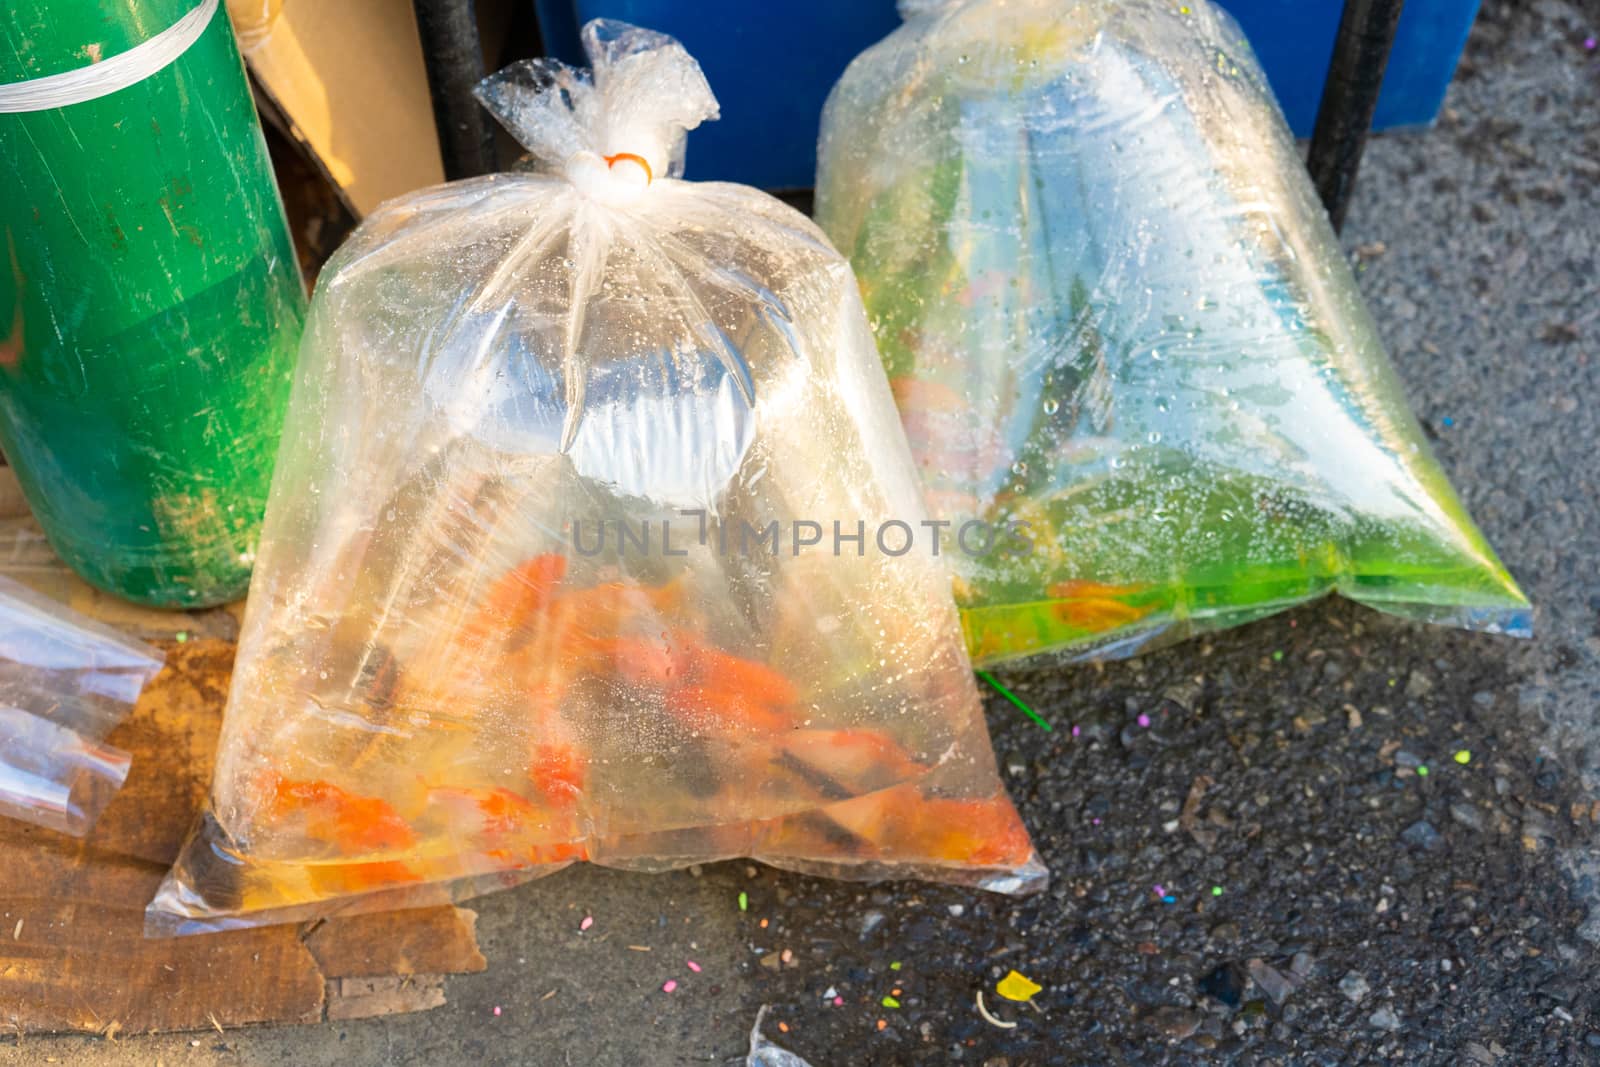 A street seller of decorative aquarium fish sells live fish in plastic bags by Try_my_best